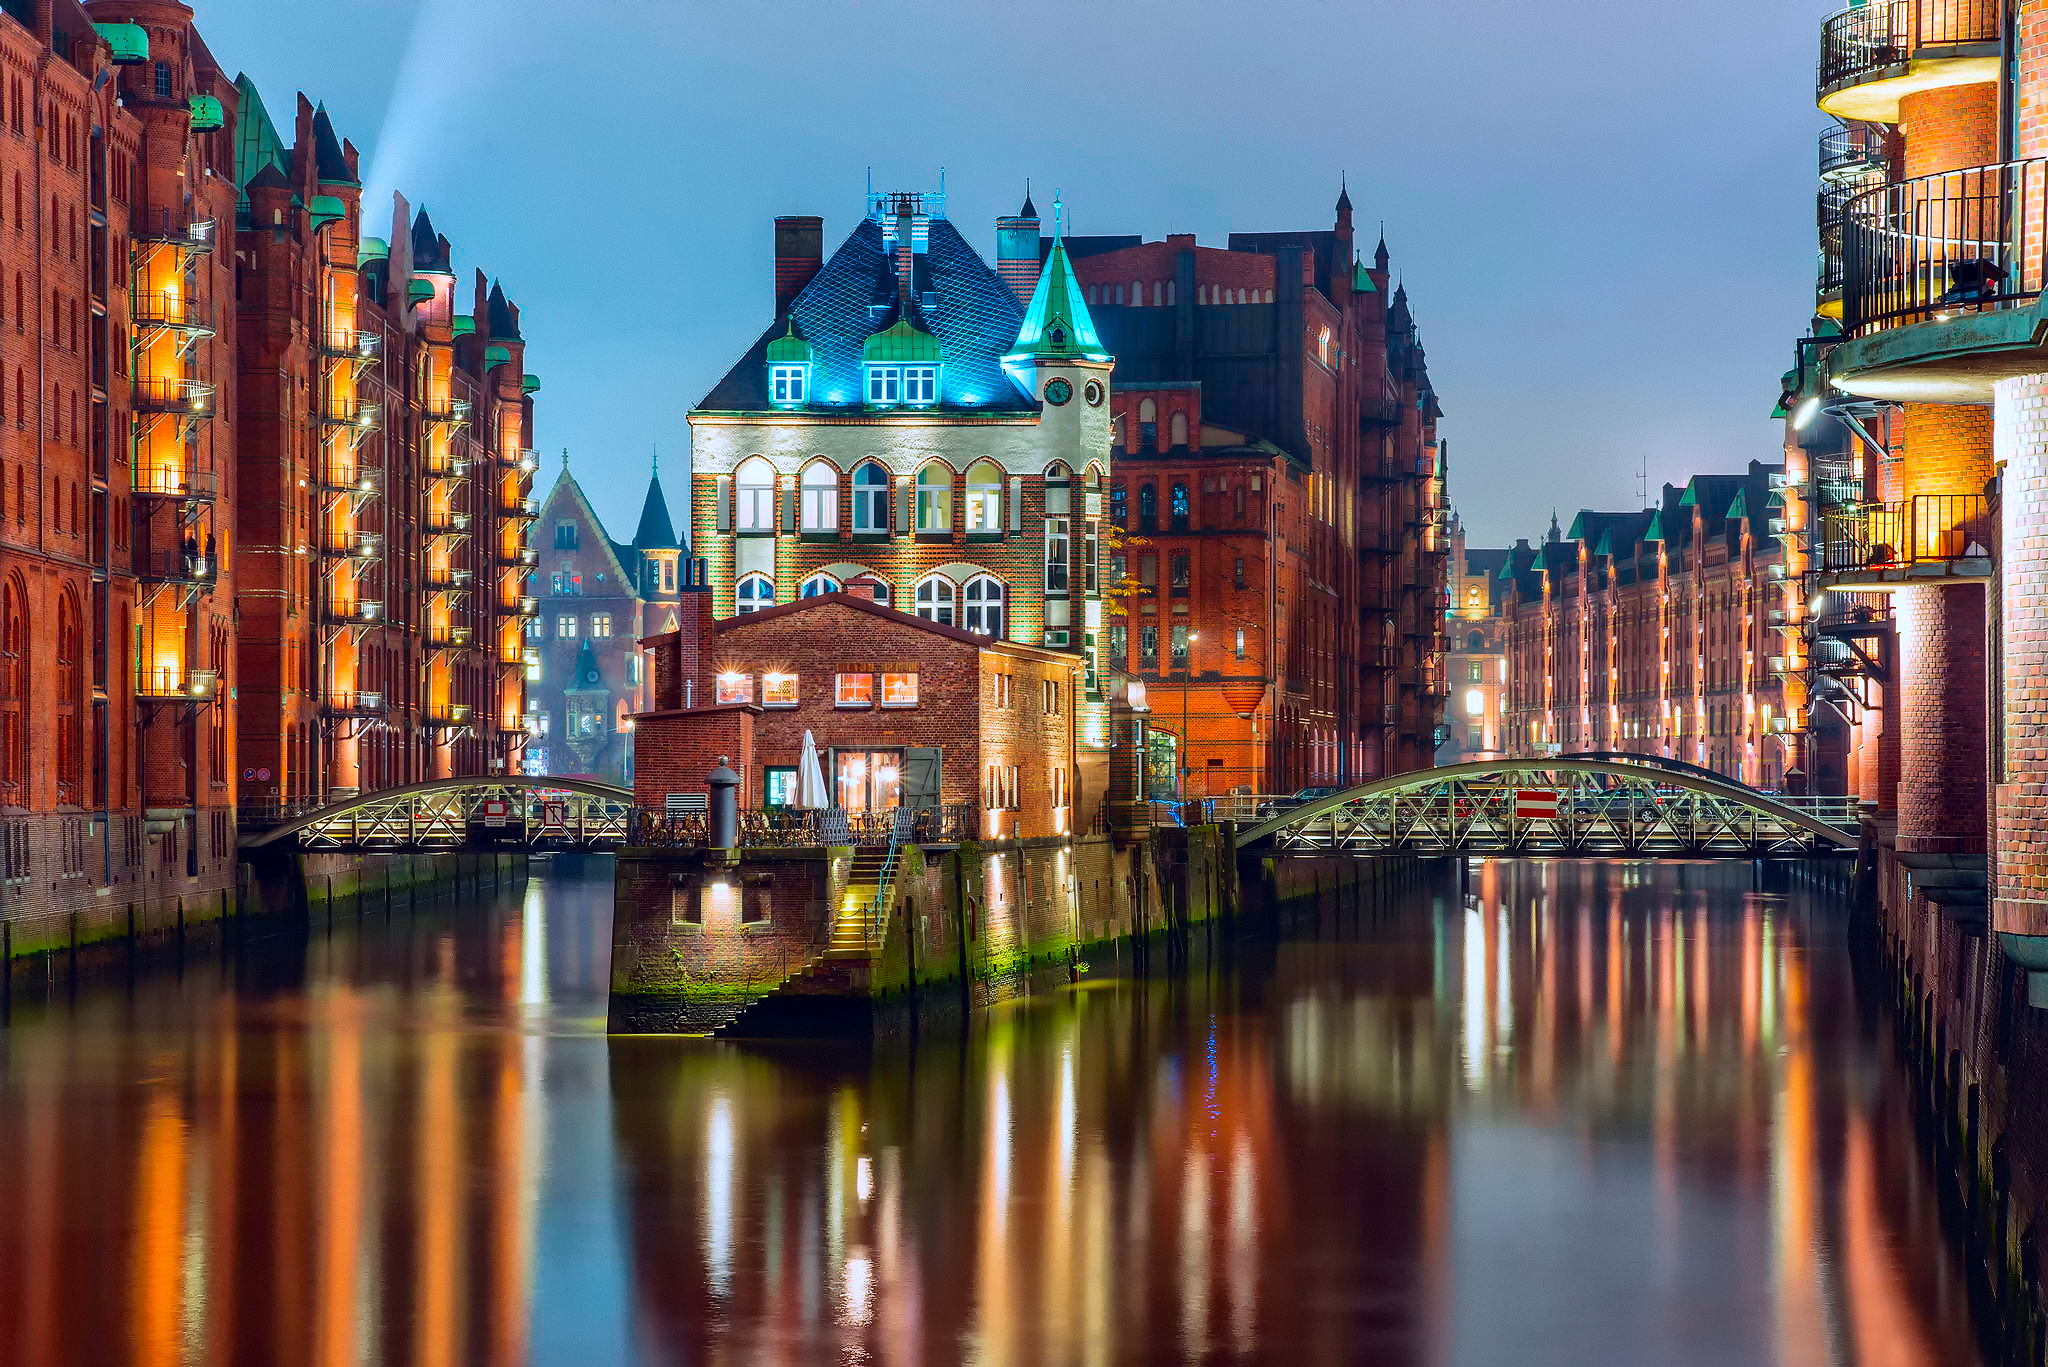 hamburg, light, man made, building, canal, germany, house, night, town, cities 4K